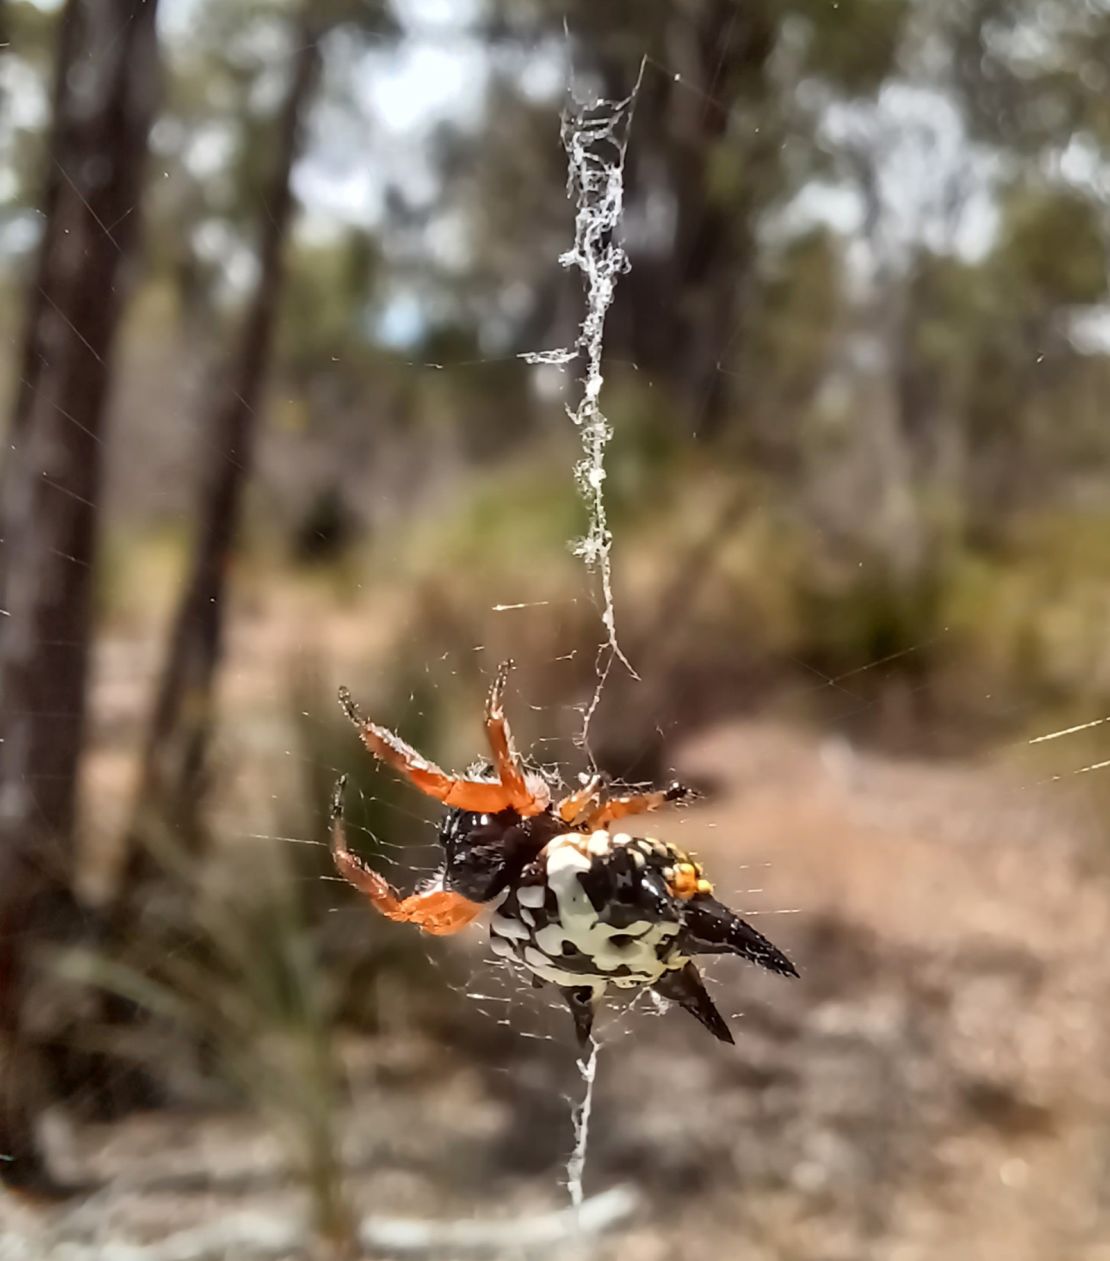 The researchers collected webs from different species of spider, including Austracantha minax, pictured here.